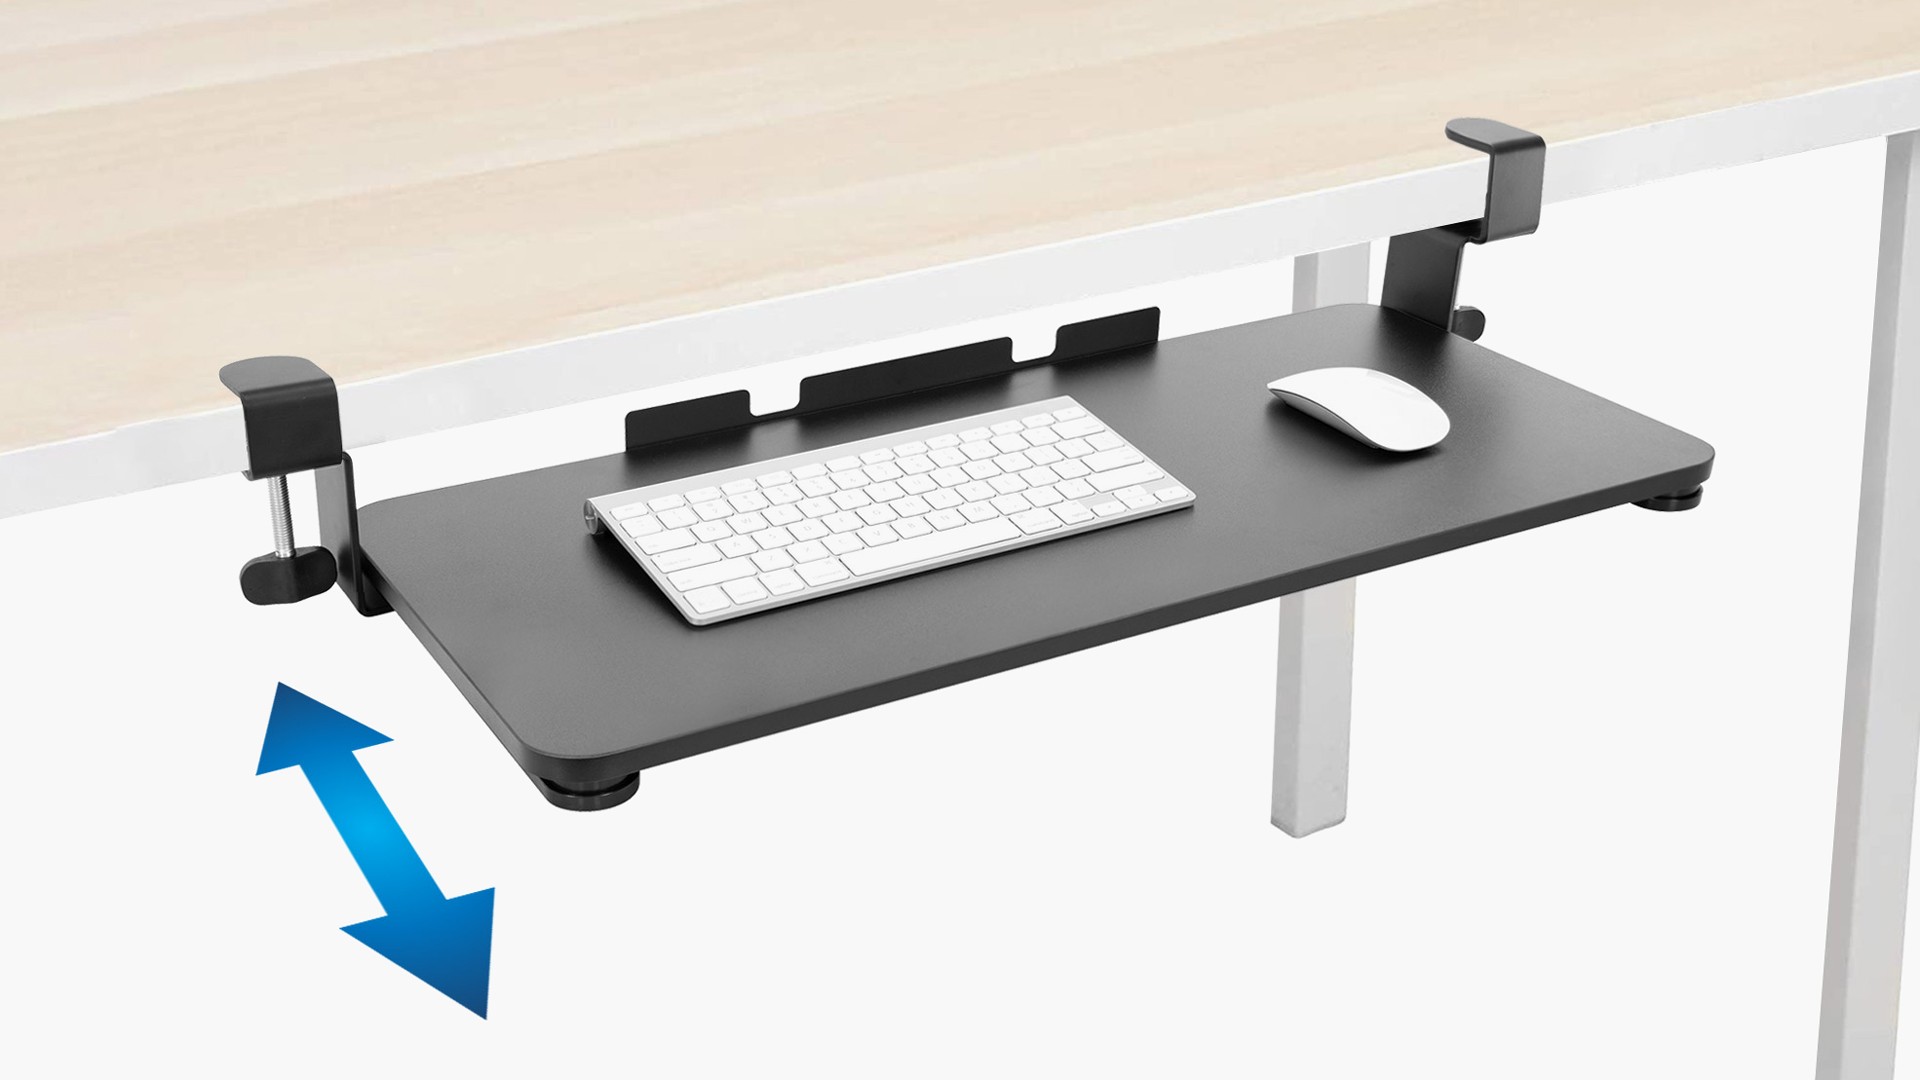 https://cdn.autonomous.ai/static/upload/images/product/galleries/2196.3015-large-clamp-on-adjustable-keyboard-and-mouse-tray-by-mount-it-large-clamp-on-adjustable-keyboard-and-mouse-tray-by-mount-it-1646278227222.jpg